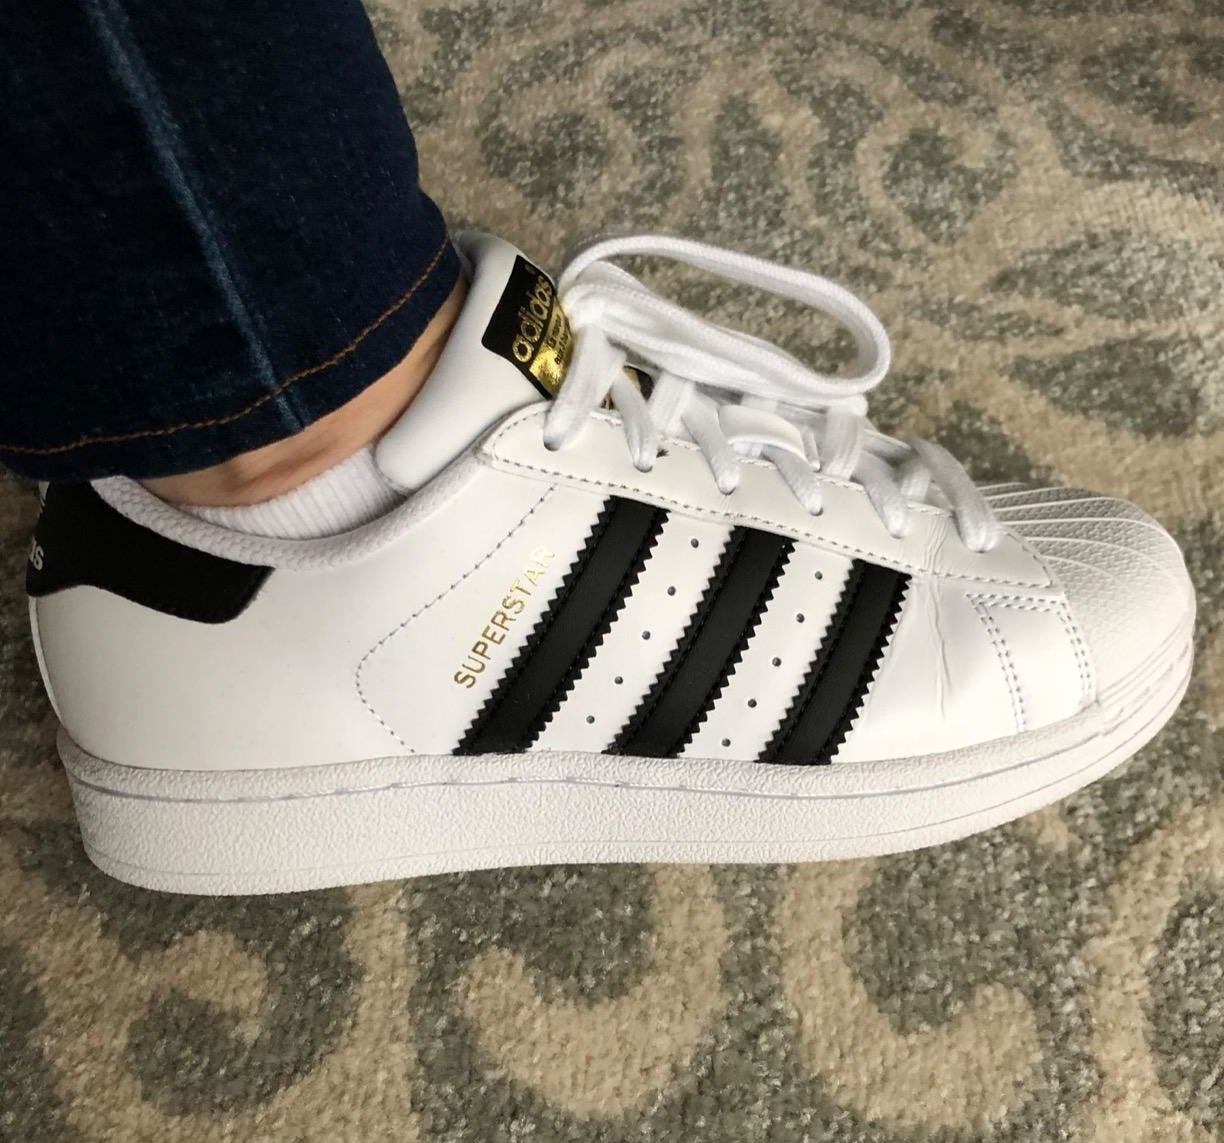 A reviewer wearing the Adidas Originals Superstar sneaker in white with black accents